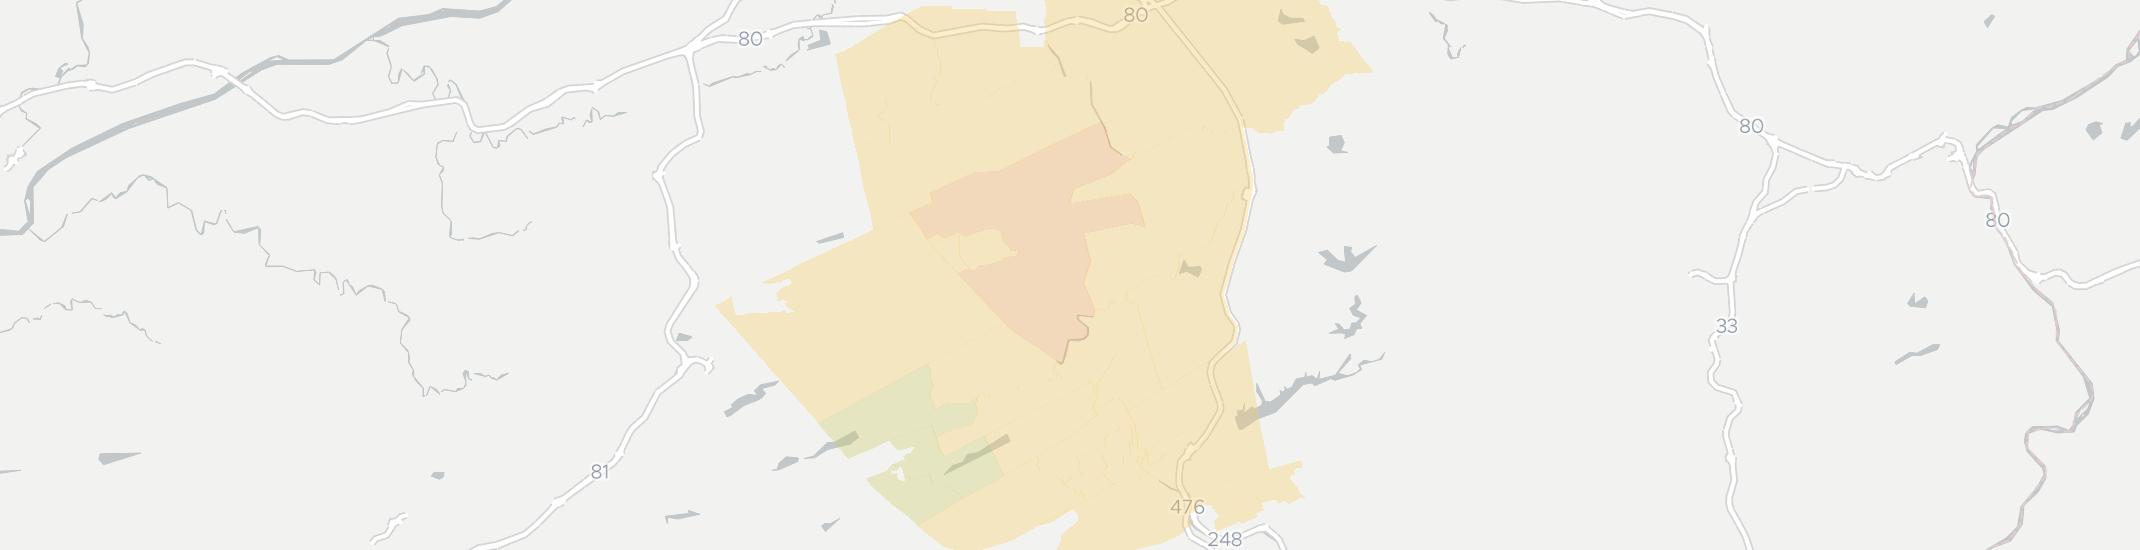 Parryville Internet Competition Map. Click for interactive map.